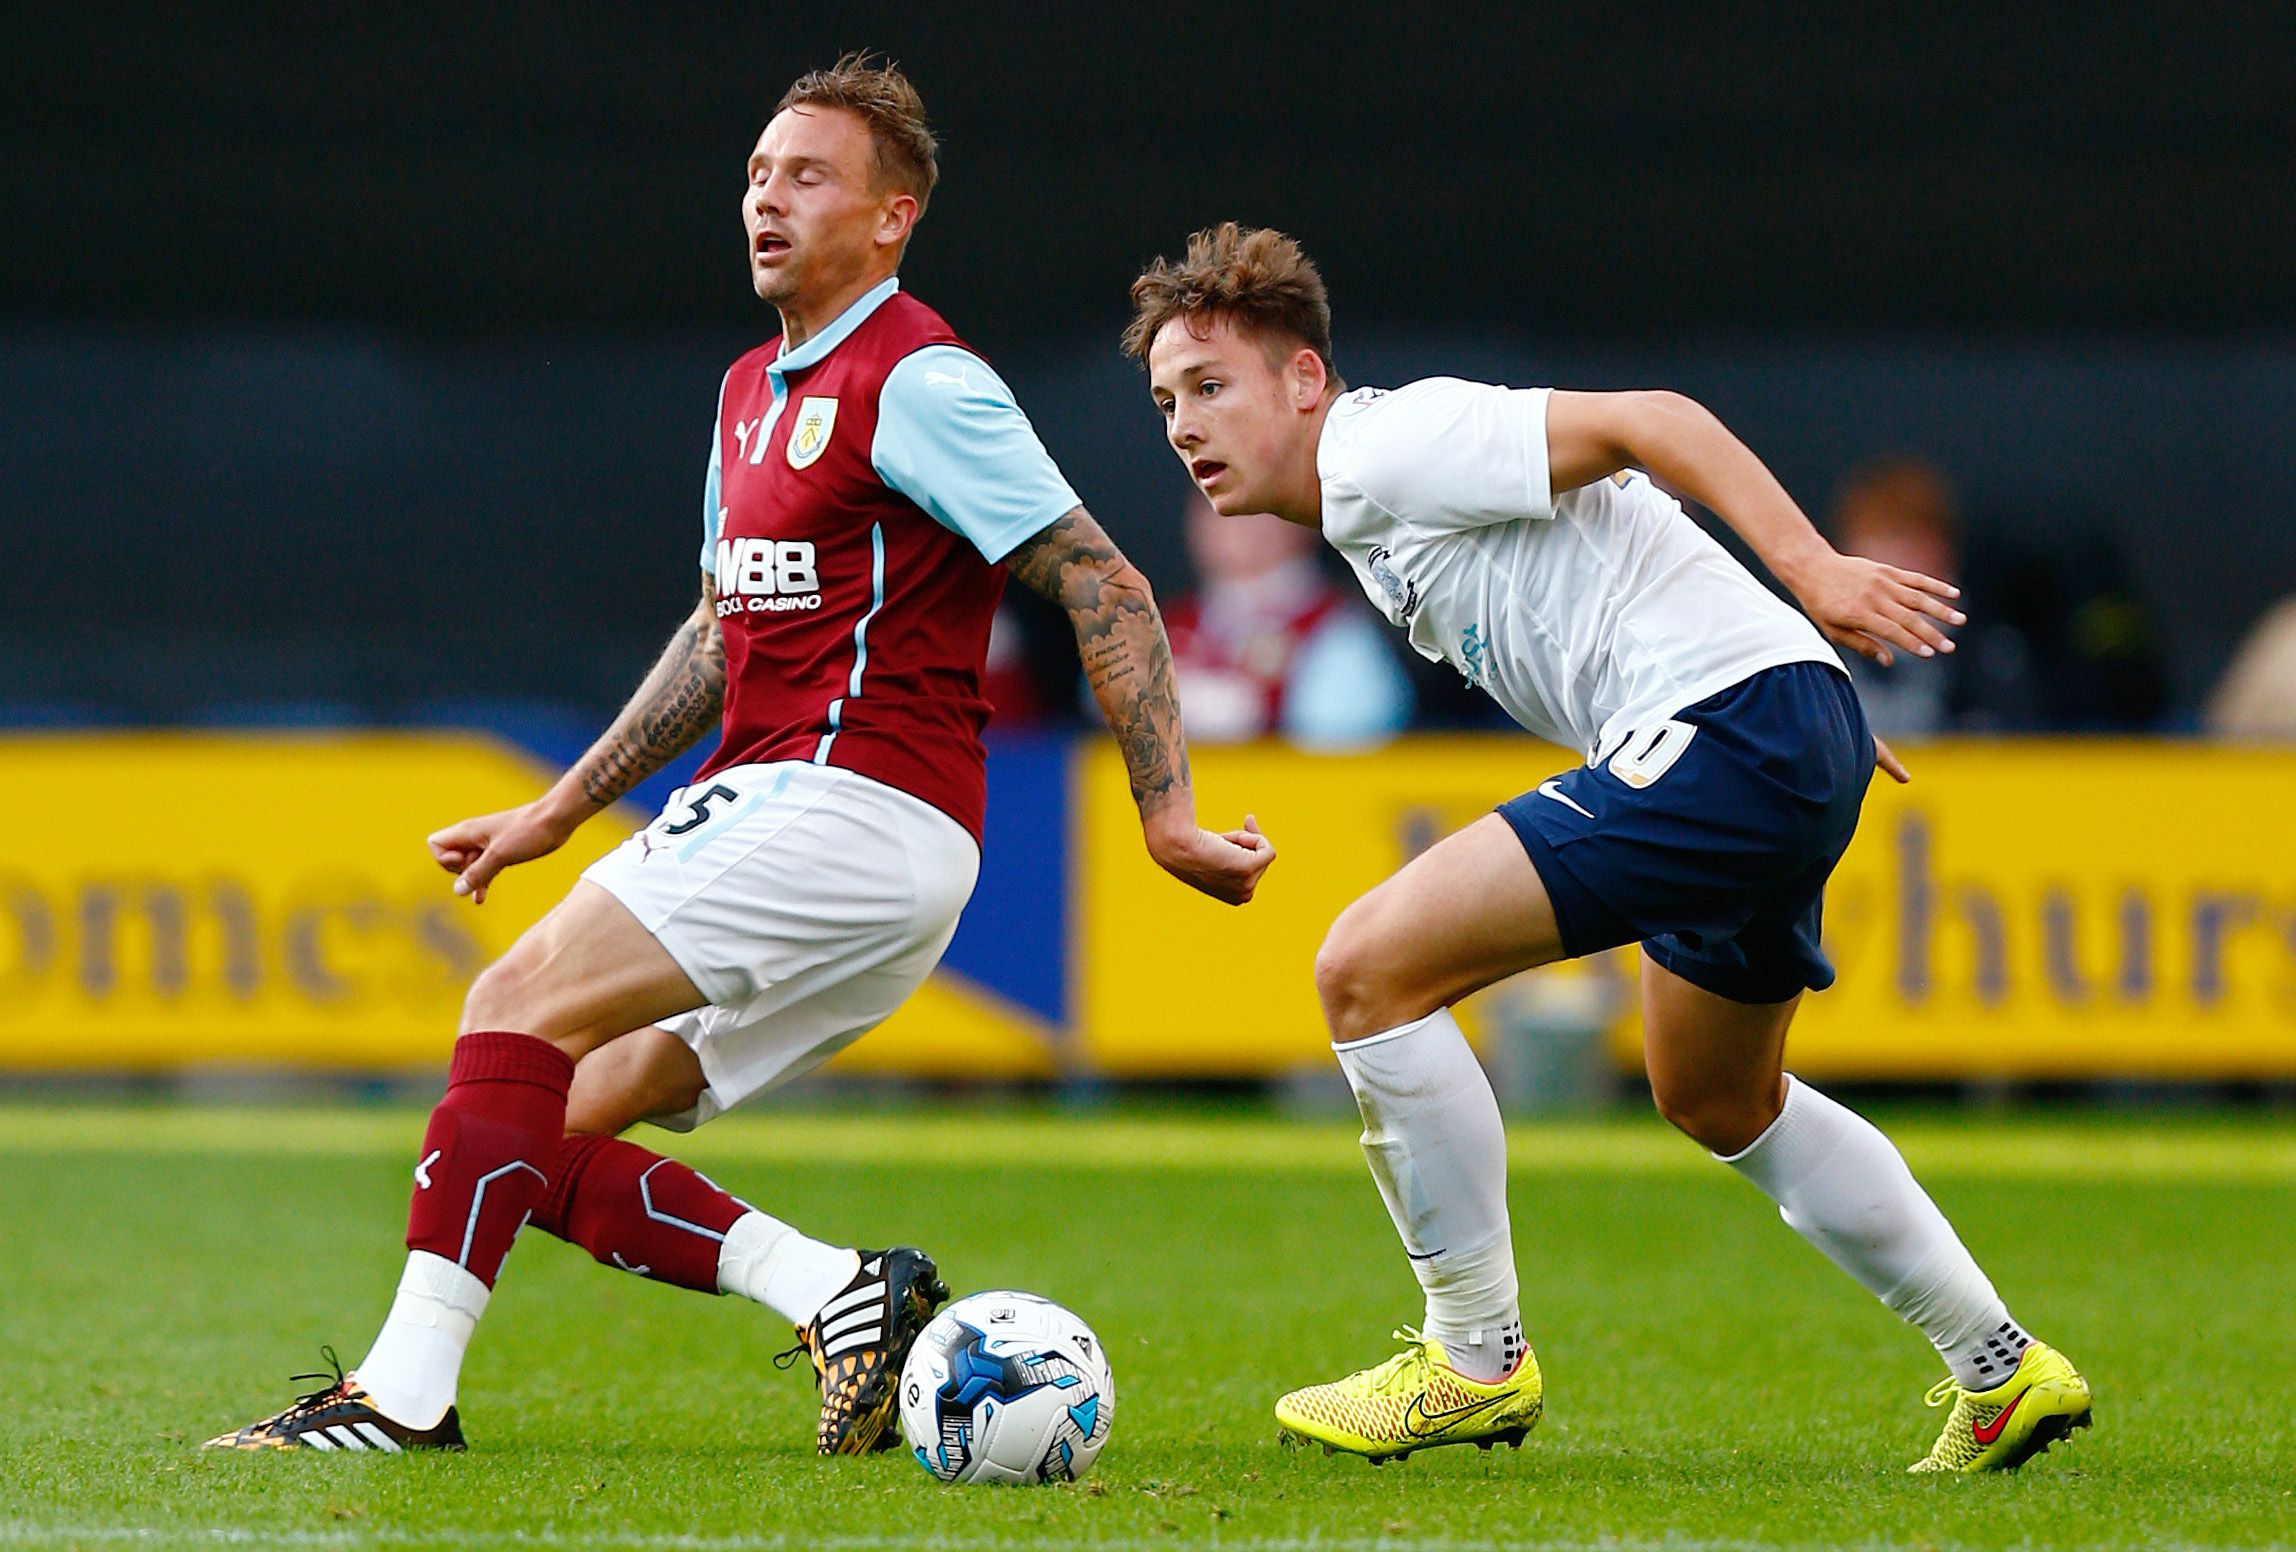 Football - Preston North End v Burnley - Pre Season Friendly - Deepdale - 29/7/14 
Preston North End's Josh Brownhill (R) in action with Burnley's Matt Taylor 
Mandatory Credit: Action Images / Jason Cairnduff 
Livepic 
EDITORIAL USE ONLY.